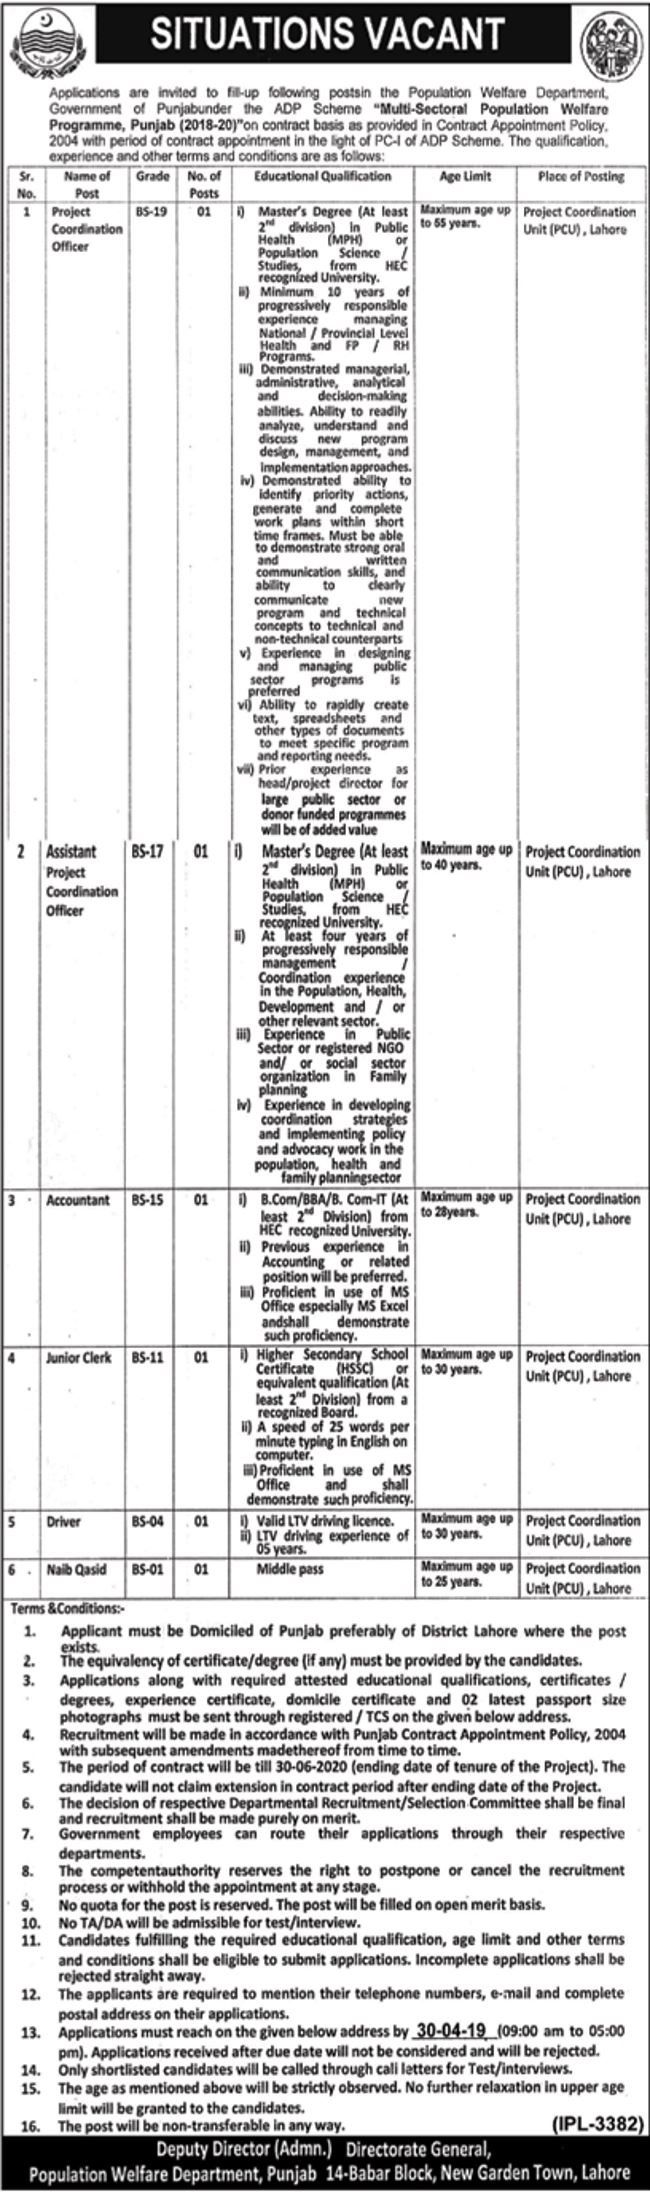 Population Welfare Department Punjab Jobs 2019 for 6+ Jr Clerk, Accountant, Coordination Officers & Other Posts